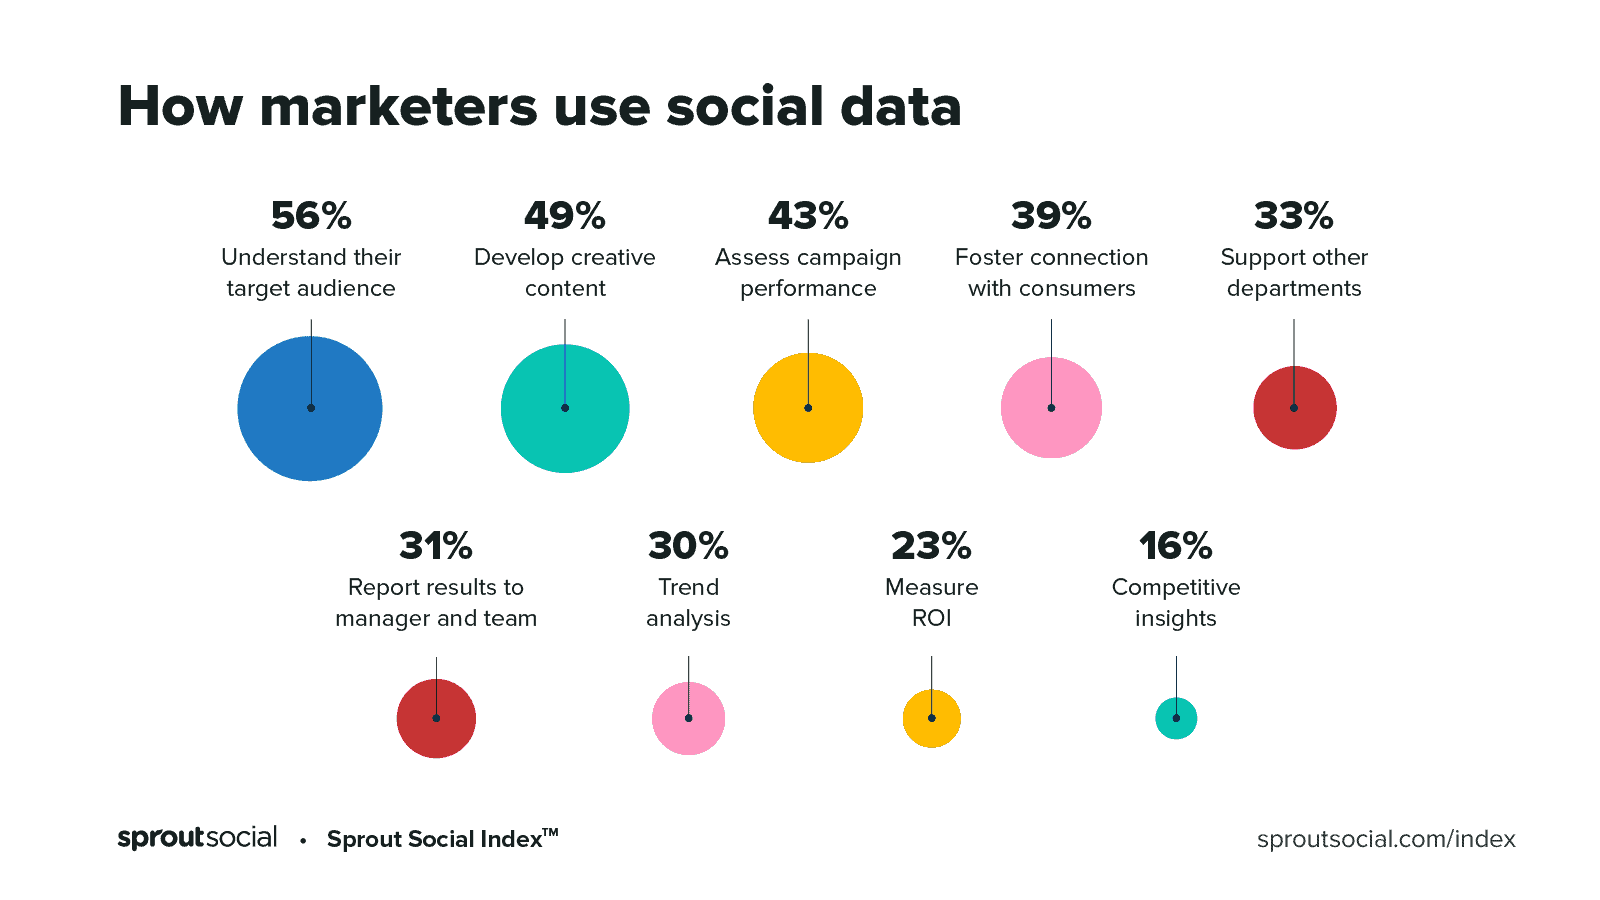 How marketers use data